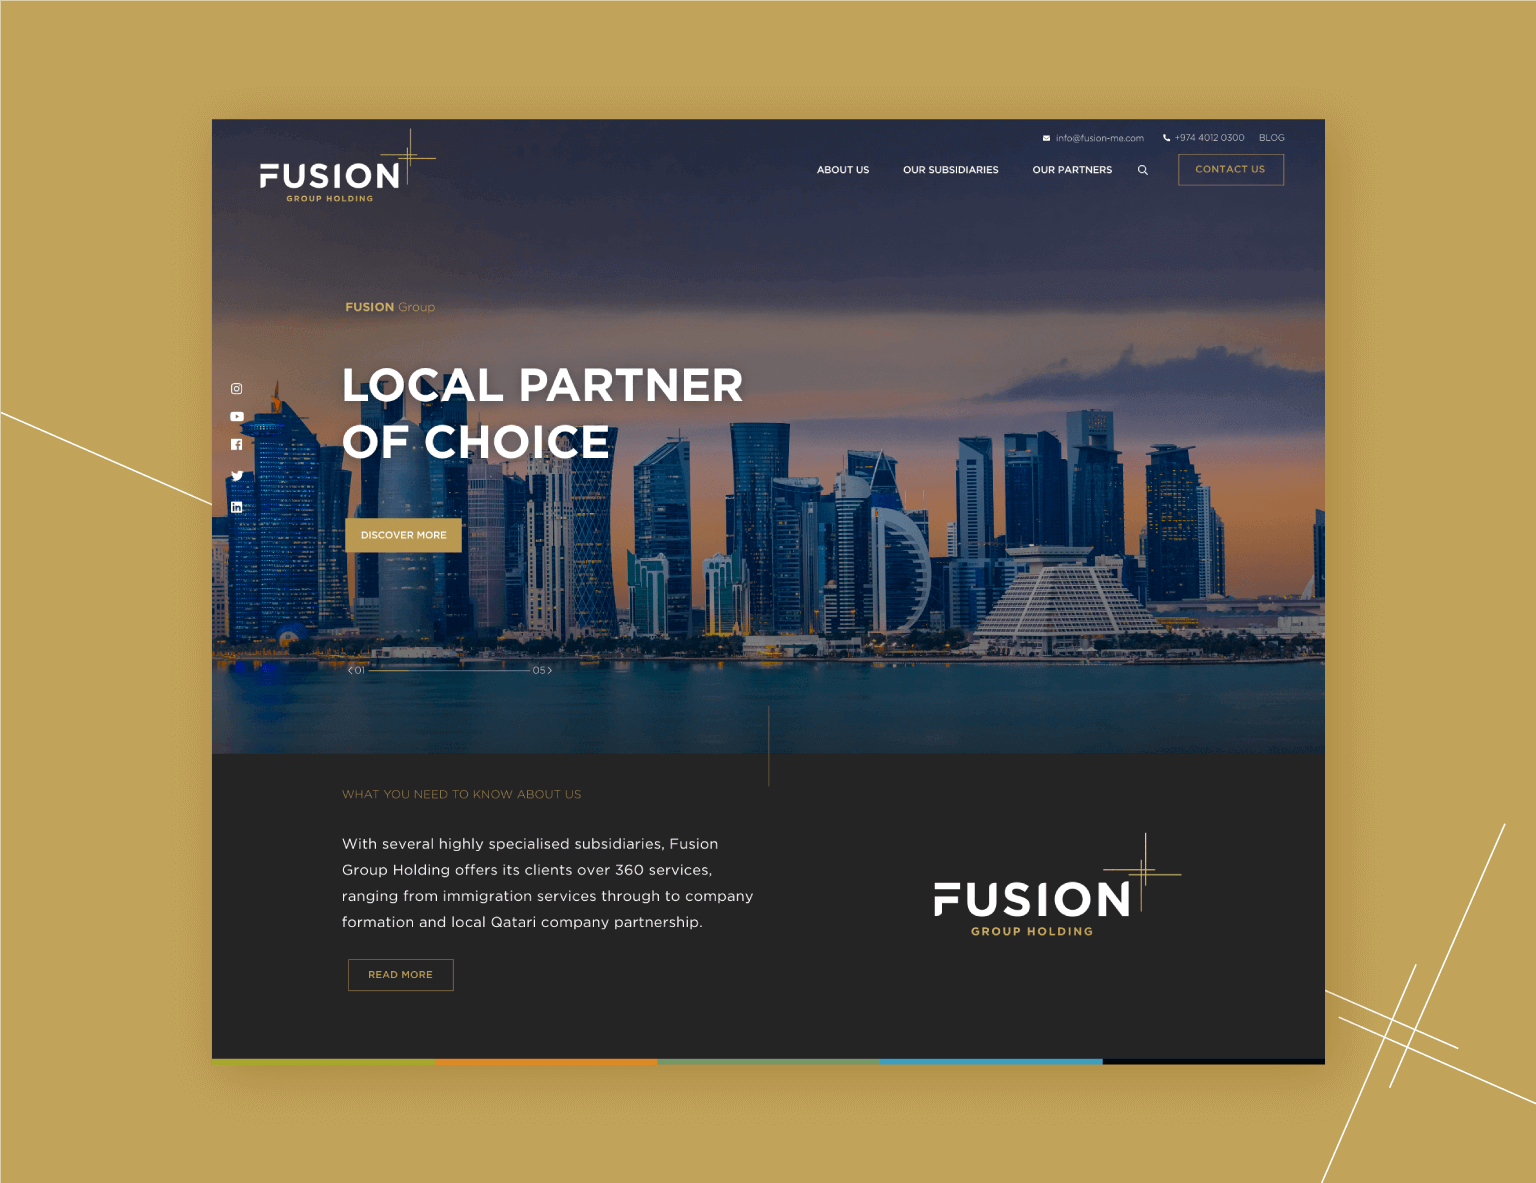 Fusion Group Holdings